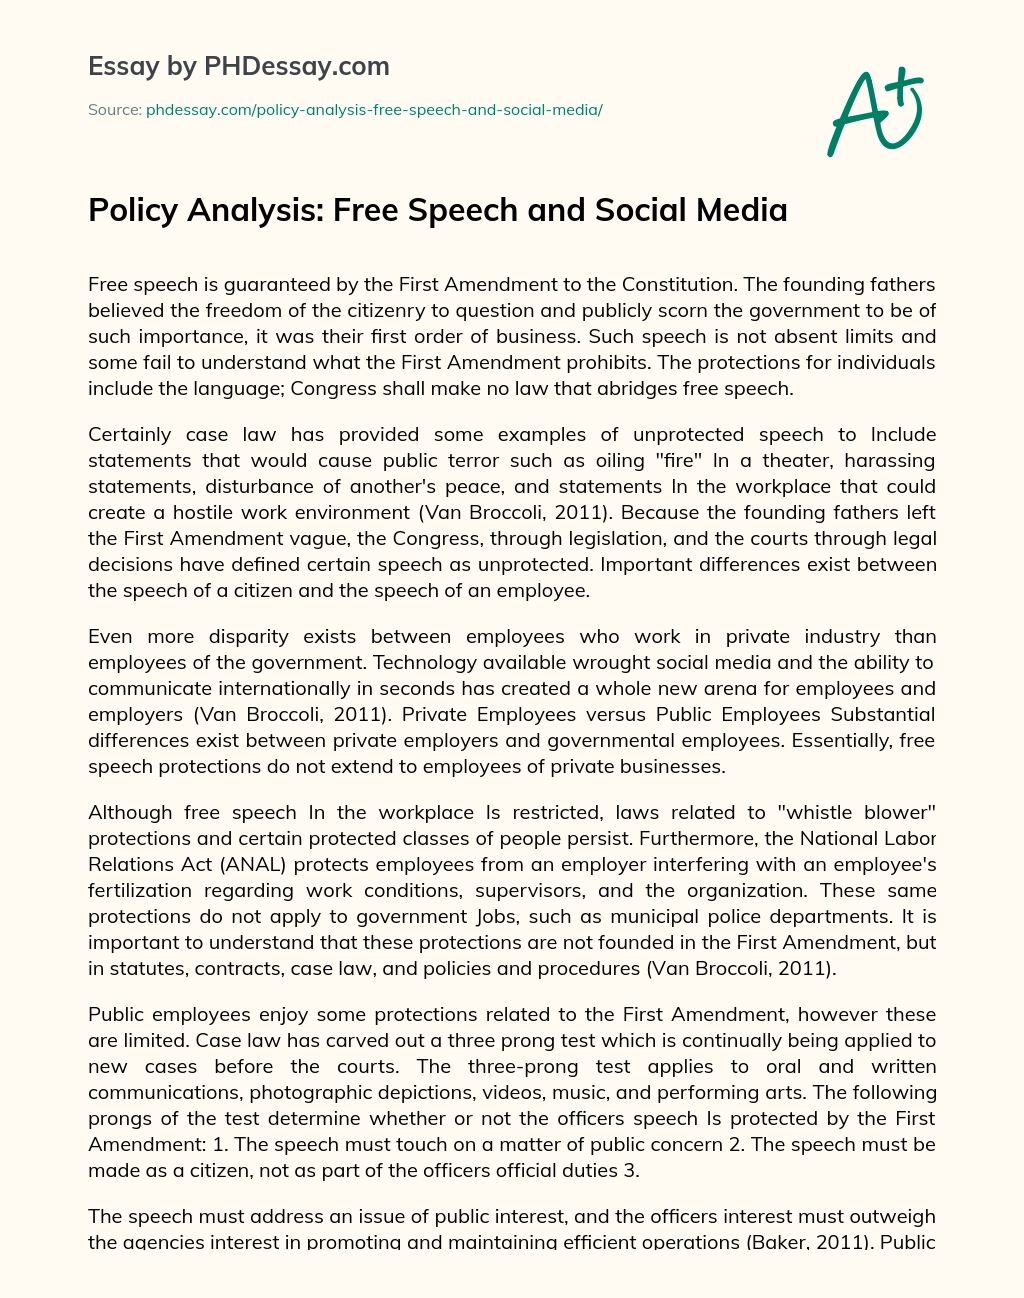 Policy Analysis: Free Speech and Social Media essay